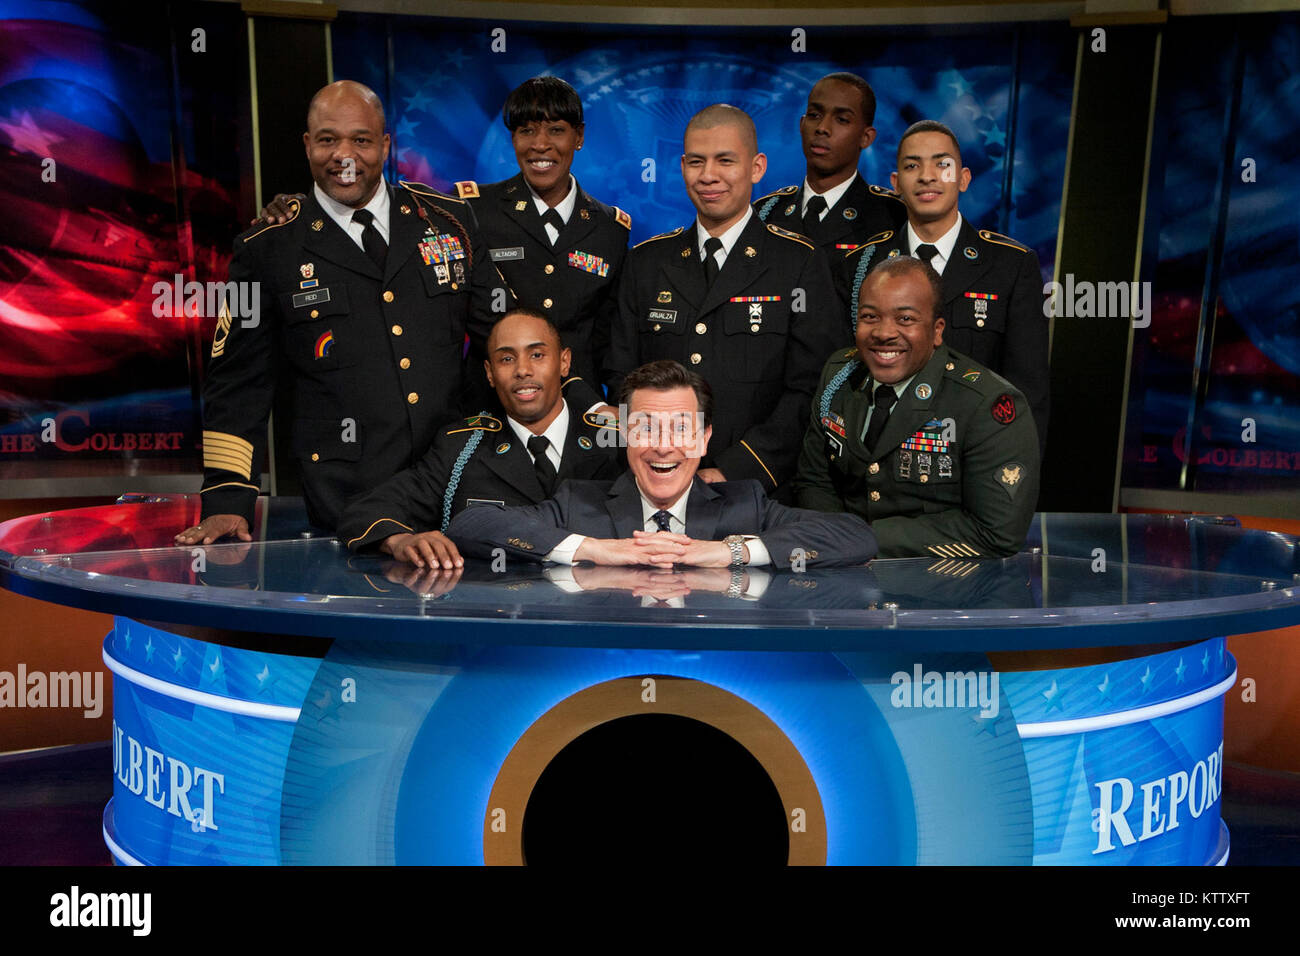 Soldiers and Family members of the 727th Military Police Law and Order Detachment, the369th Sustainment Brigade and 1st Battalion, 69th Infantry Regiment gather around Stephen Colbert, host of The Colbert Report after his conversation with first lady Michelle Obama, on the first anniversary promoting Joining Forces,  a national initiative led by the first lady and Dr. Jill Biden that mobilizes all sectors of society to give our service members and their families the opportunities and support they have earned. Stock Photo